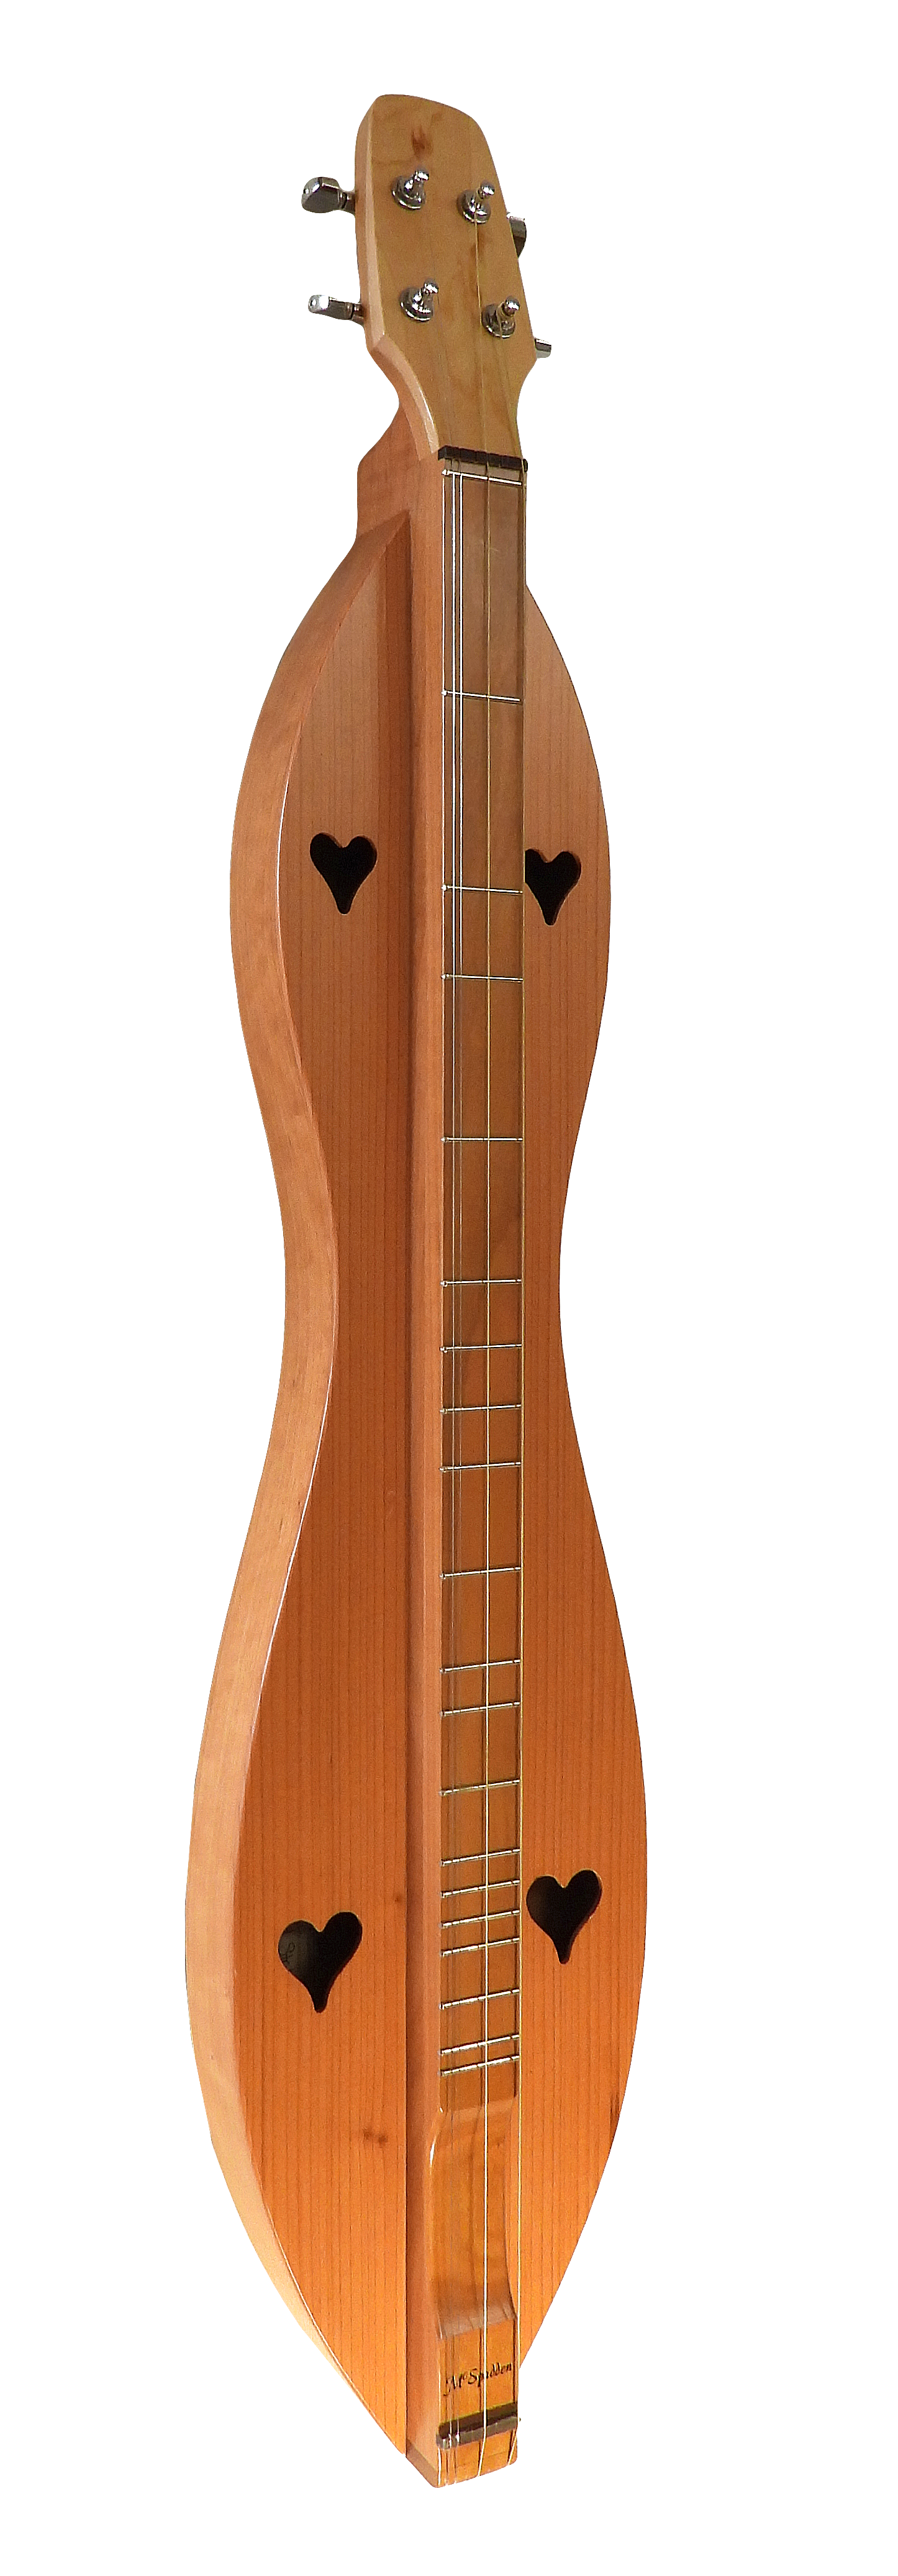 4 String Baritone, Flathead, Hourglass with Cherry back and sides, Redwood top. (4FHCRB)